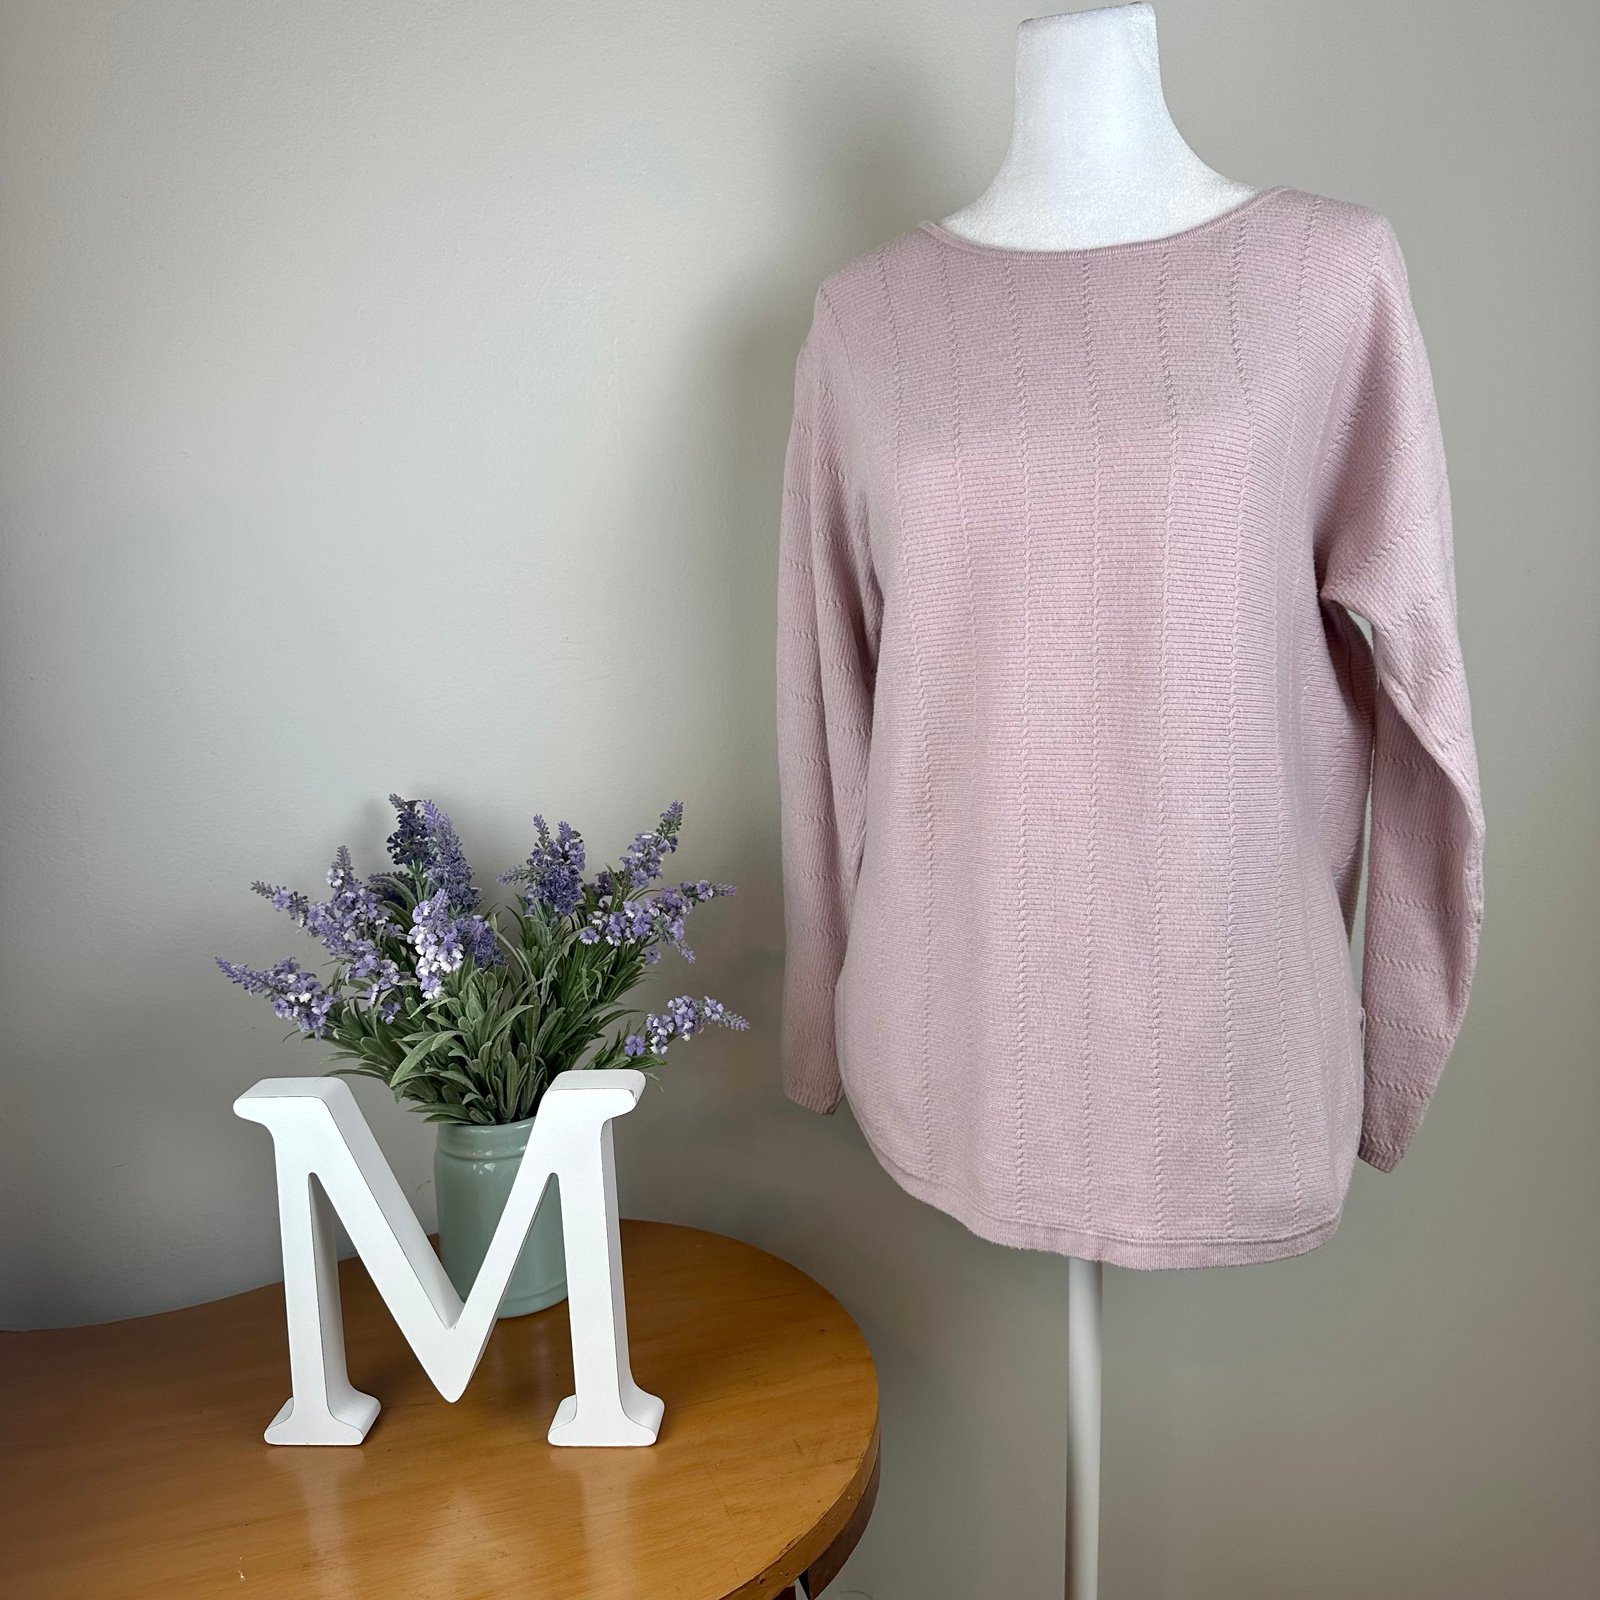 Popular Grace Pale Pink Rounded Hem Sweater - Size Small PGJBTPujA Discount